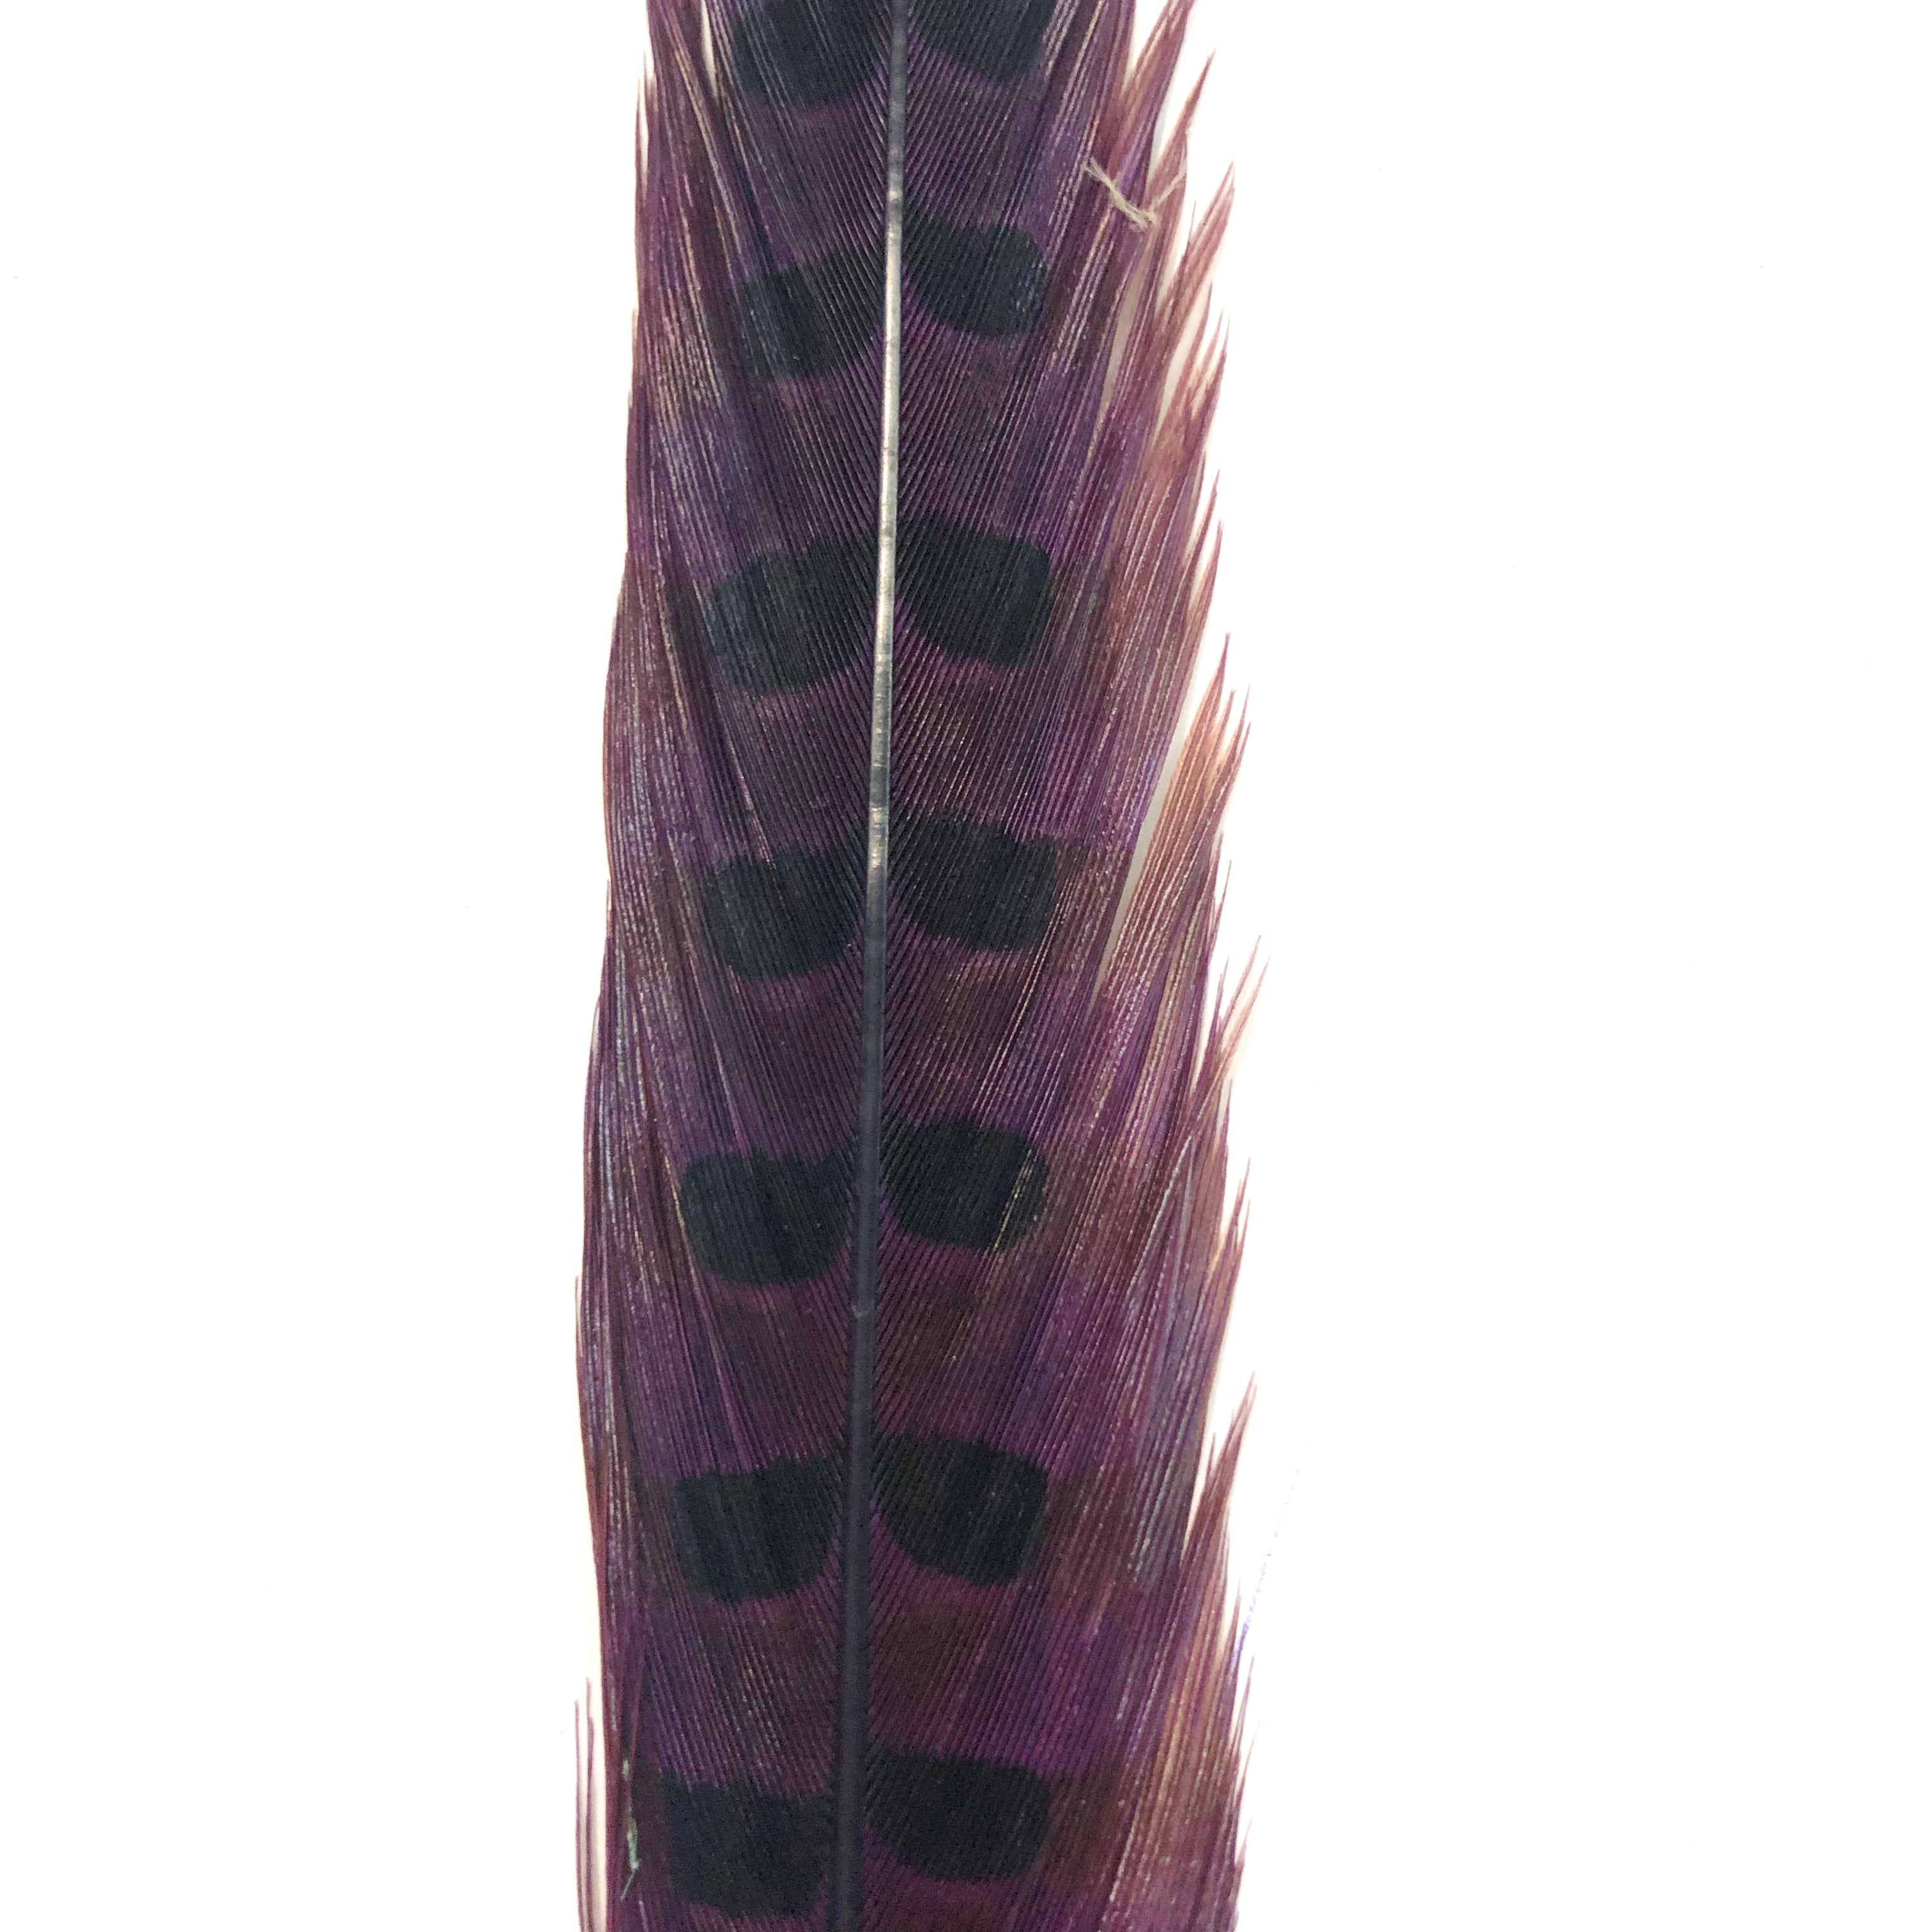 10" to 20" Ringneck Pheasant Tail Feather - Eggplant